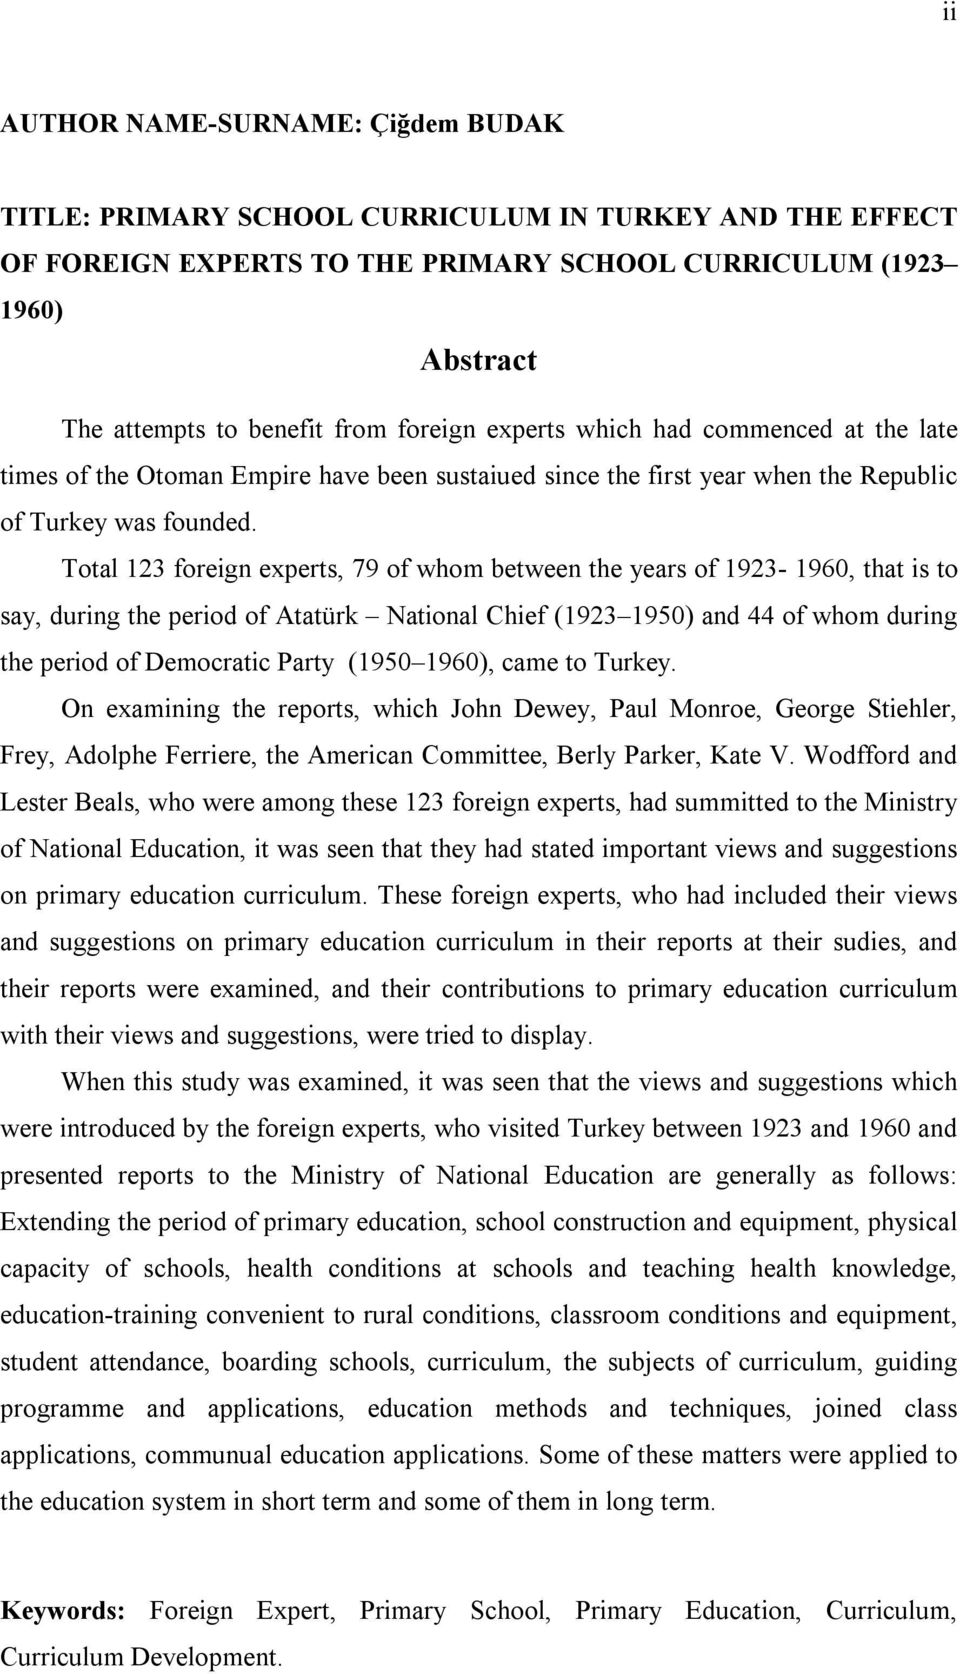 Total 123 foreign experts, 79 of whom between the years of 1923-1960, that is to say, during the period of Atatürk National Chief (1923 1950) and 44 of whom during the period of Democratic Party